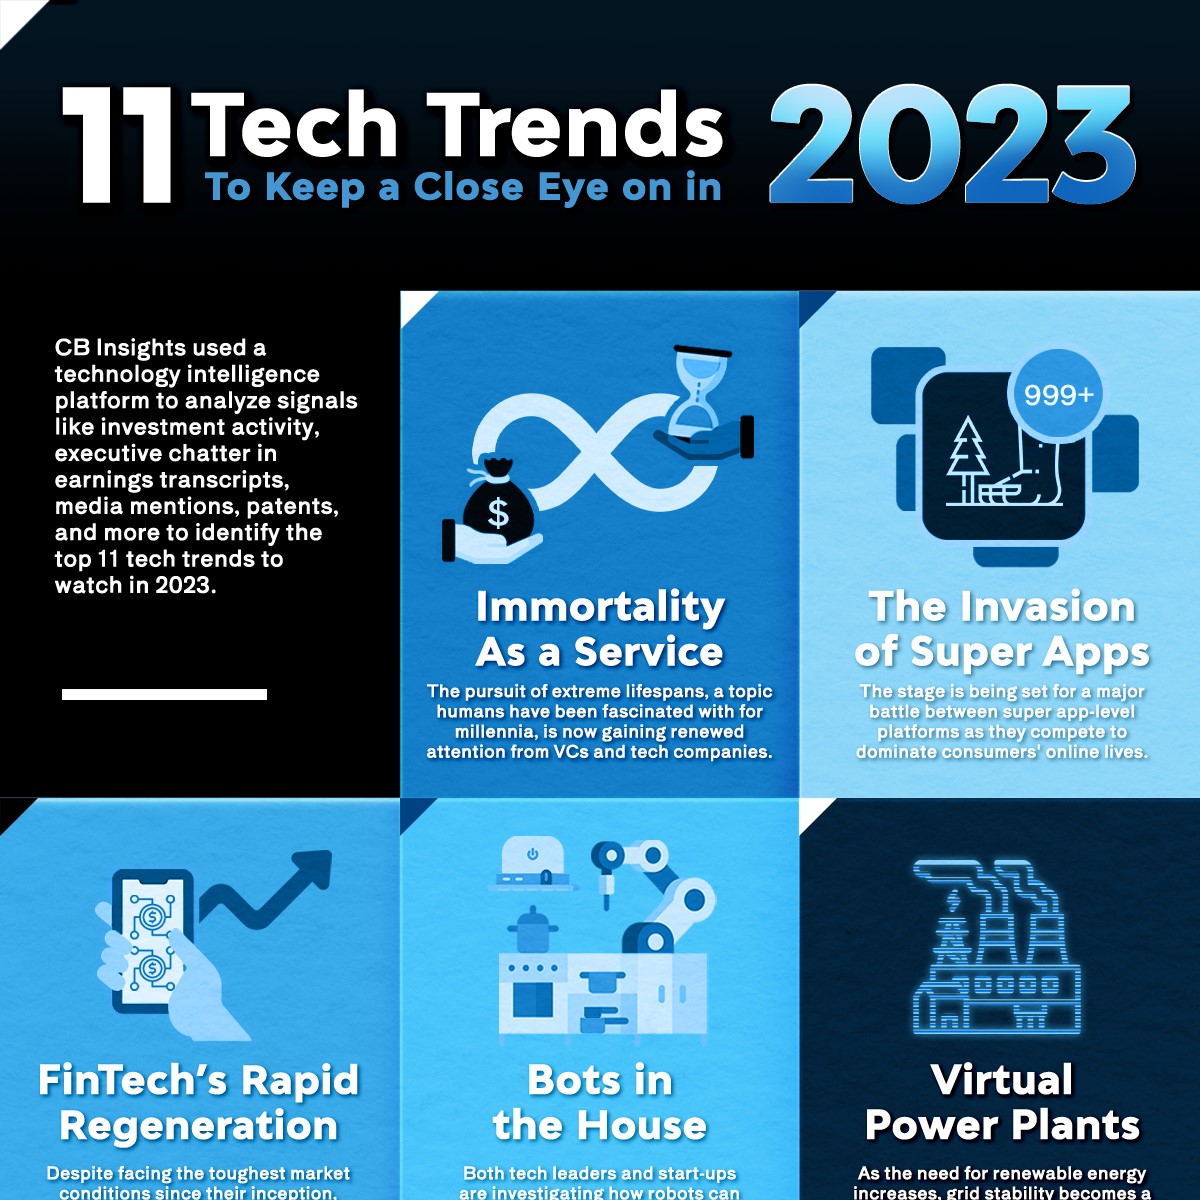 infographic trends